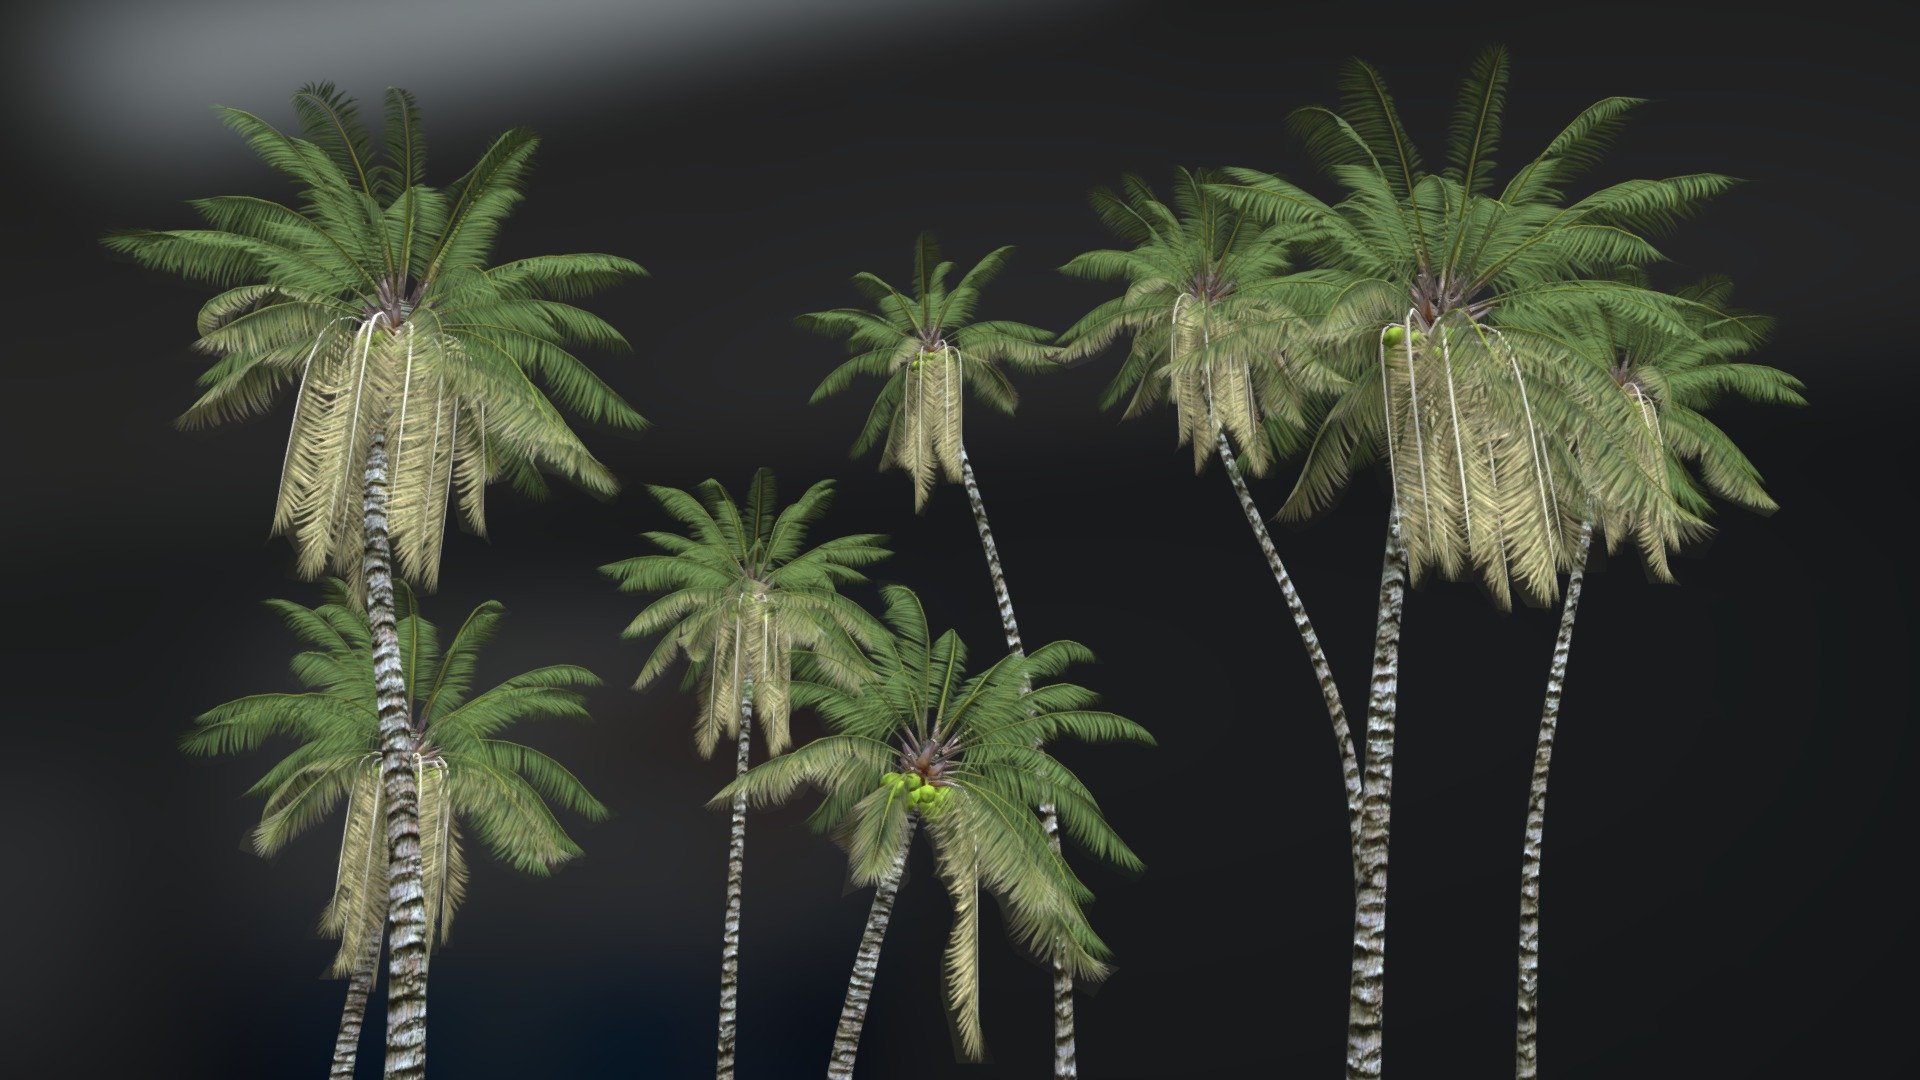 THIS PRODUCT CONTAINS MANY ANIMATED COCONUT TREES. IT MAY BE IDEAL FOR YOUR BEACH SCENES IN YOUR GAMES. HAVE A GOOD TIME! - MANY COCONUT TREES IN ANIMATION - Buy Royalty Free 3D model by PATH DEFORM (@pathdeform) 3d model